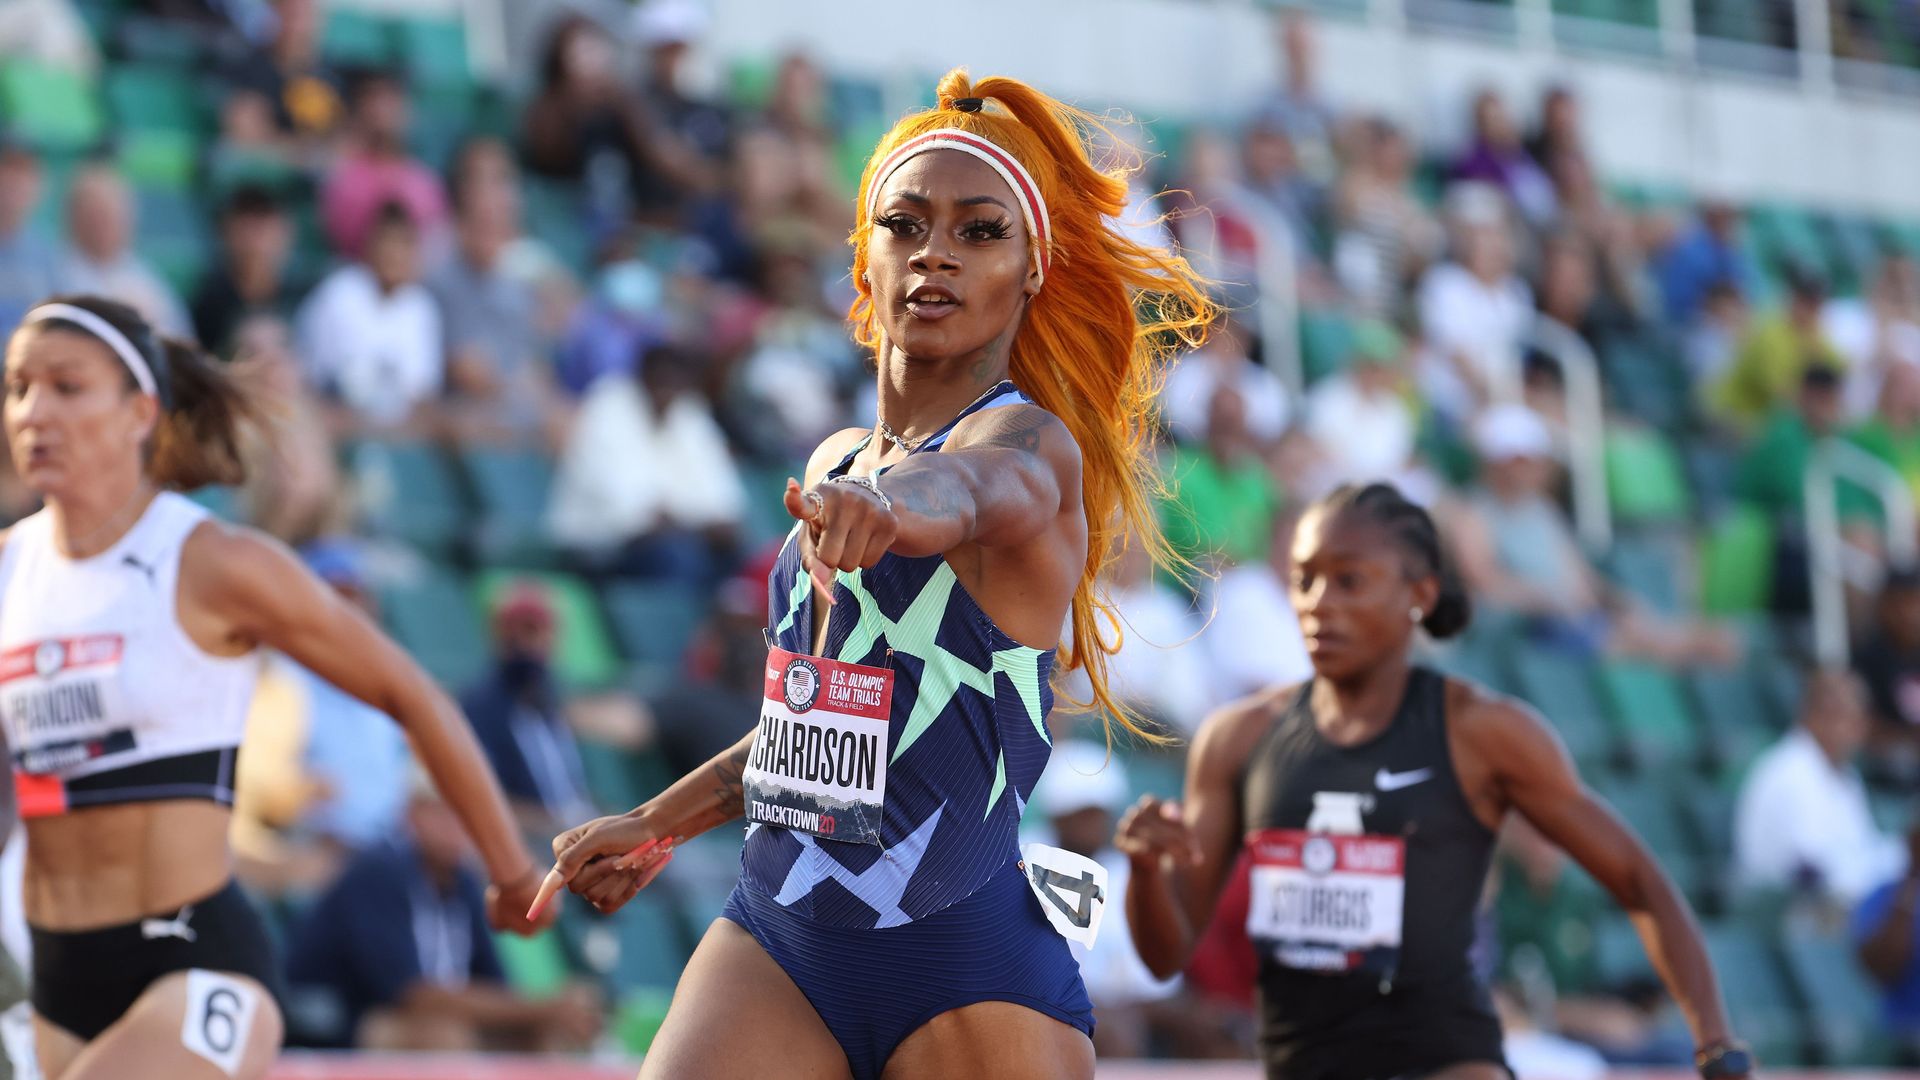 Sha'Carri Richardson competes in the Women's 100 Meter on day 2 of the 2020 U.S. Olympic Track & Field Team Trials